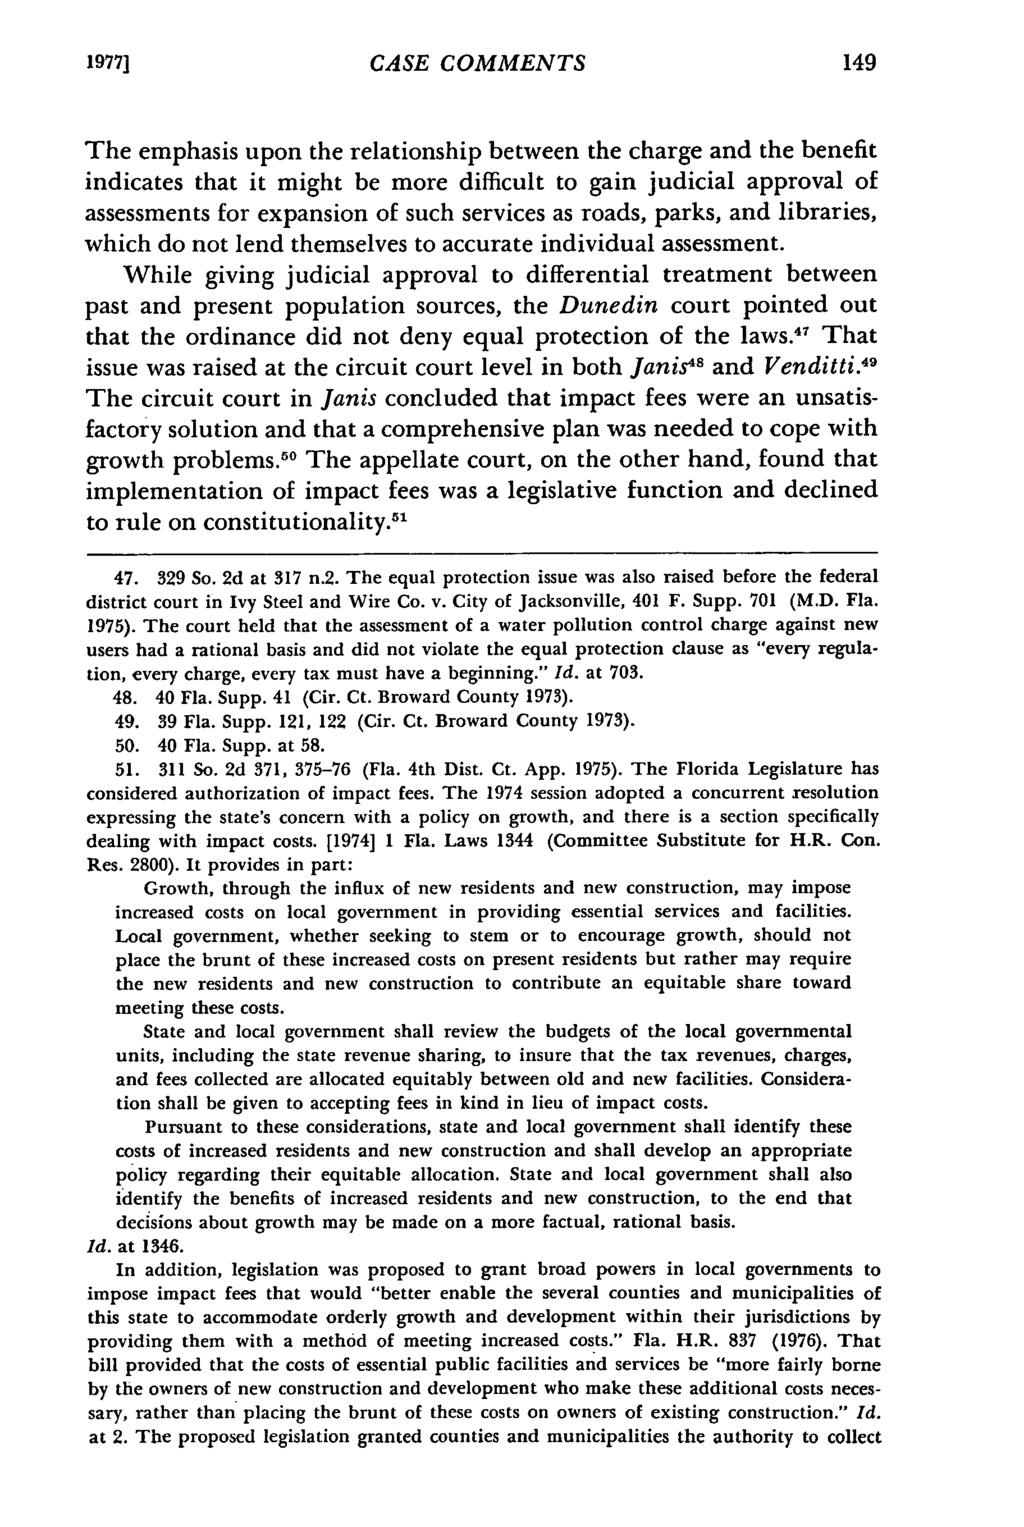 1977] CASE COMMENTS The emphasis upon the relationship between the charge and the benefit indicates that it might be more difficult to gain judicial approval of assessments for expansion of such